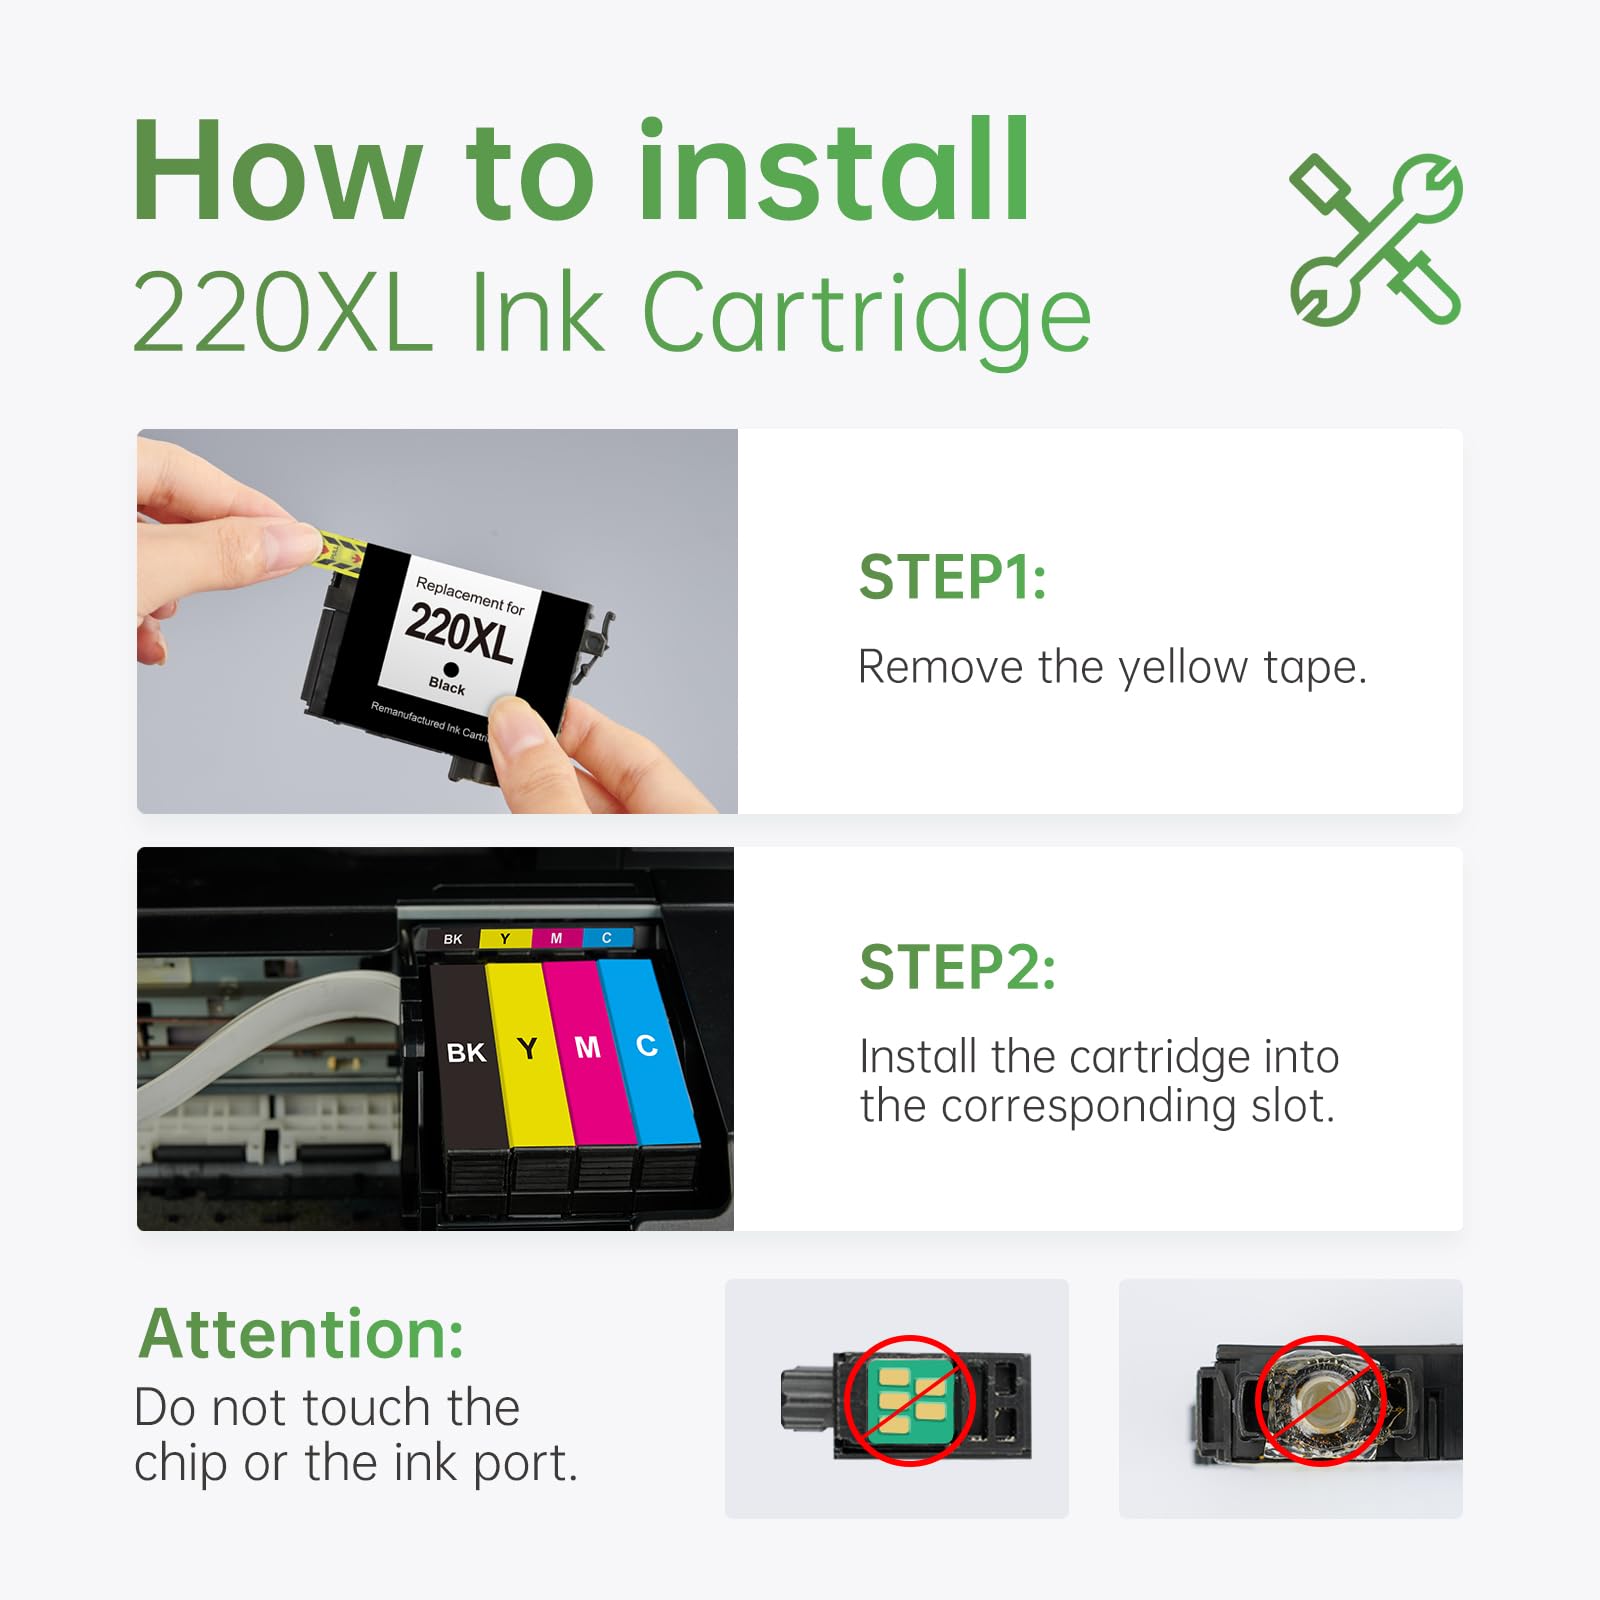 Easy Installation Instructions for LEMERO 220XL Ink Cartridges with Tips for Best Performance in Epson Compatible Printers.